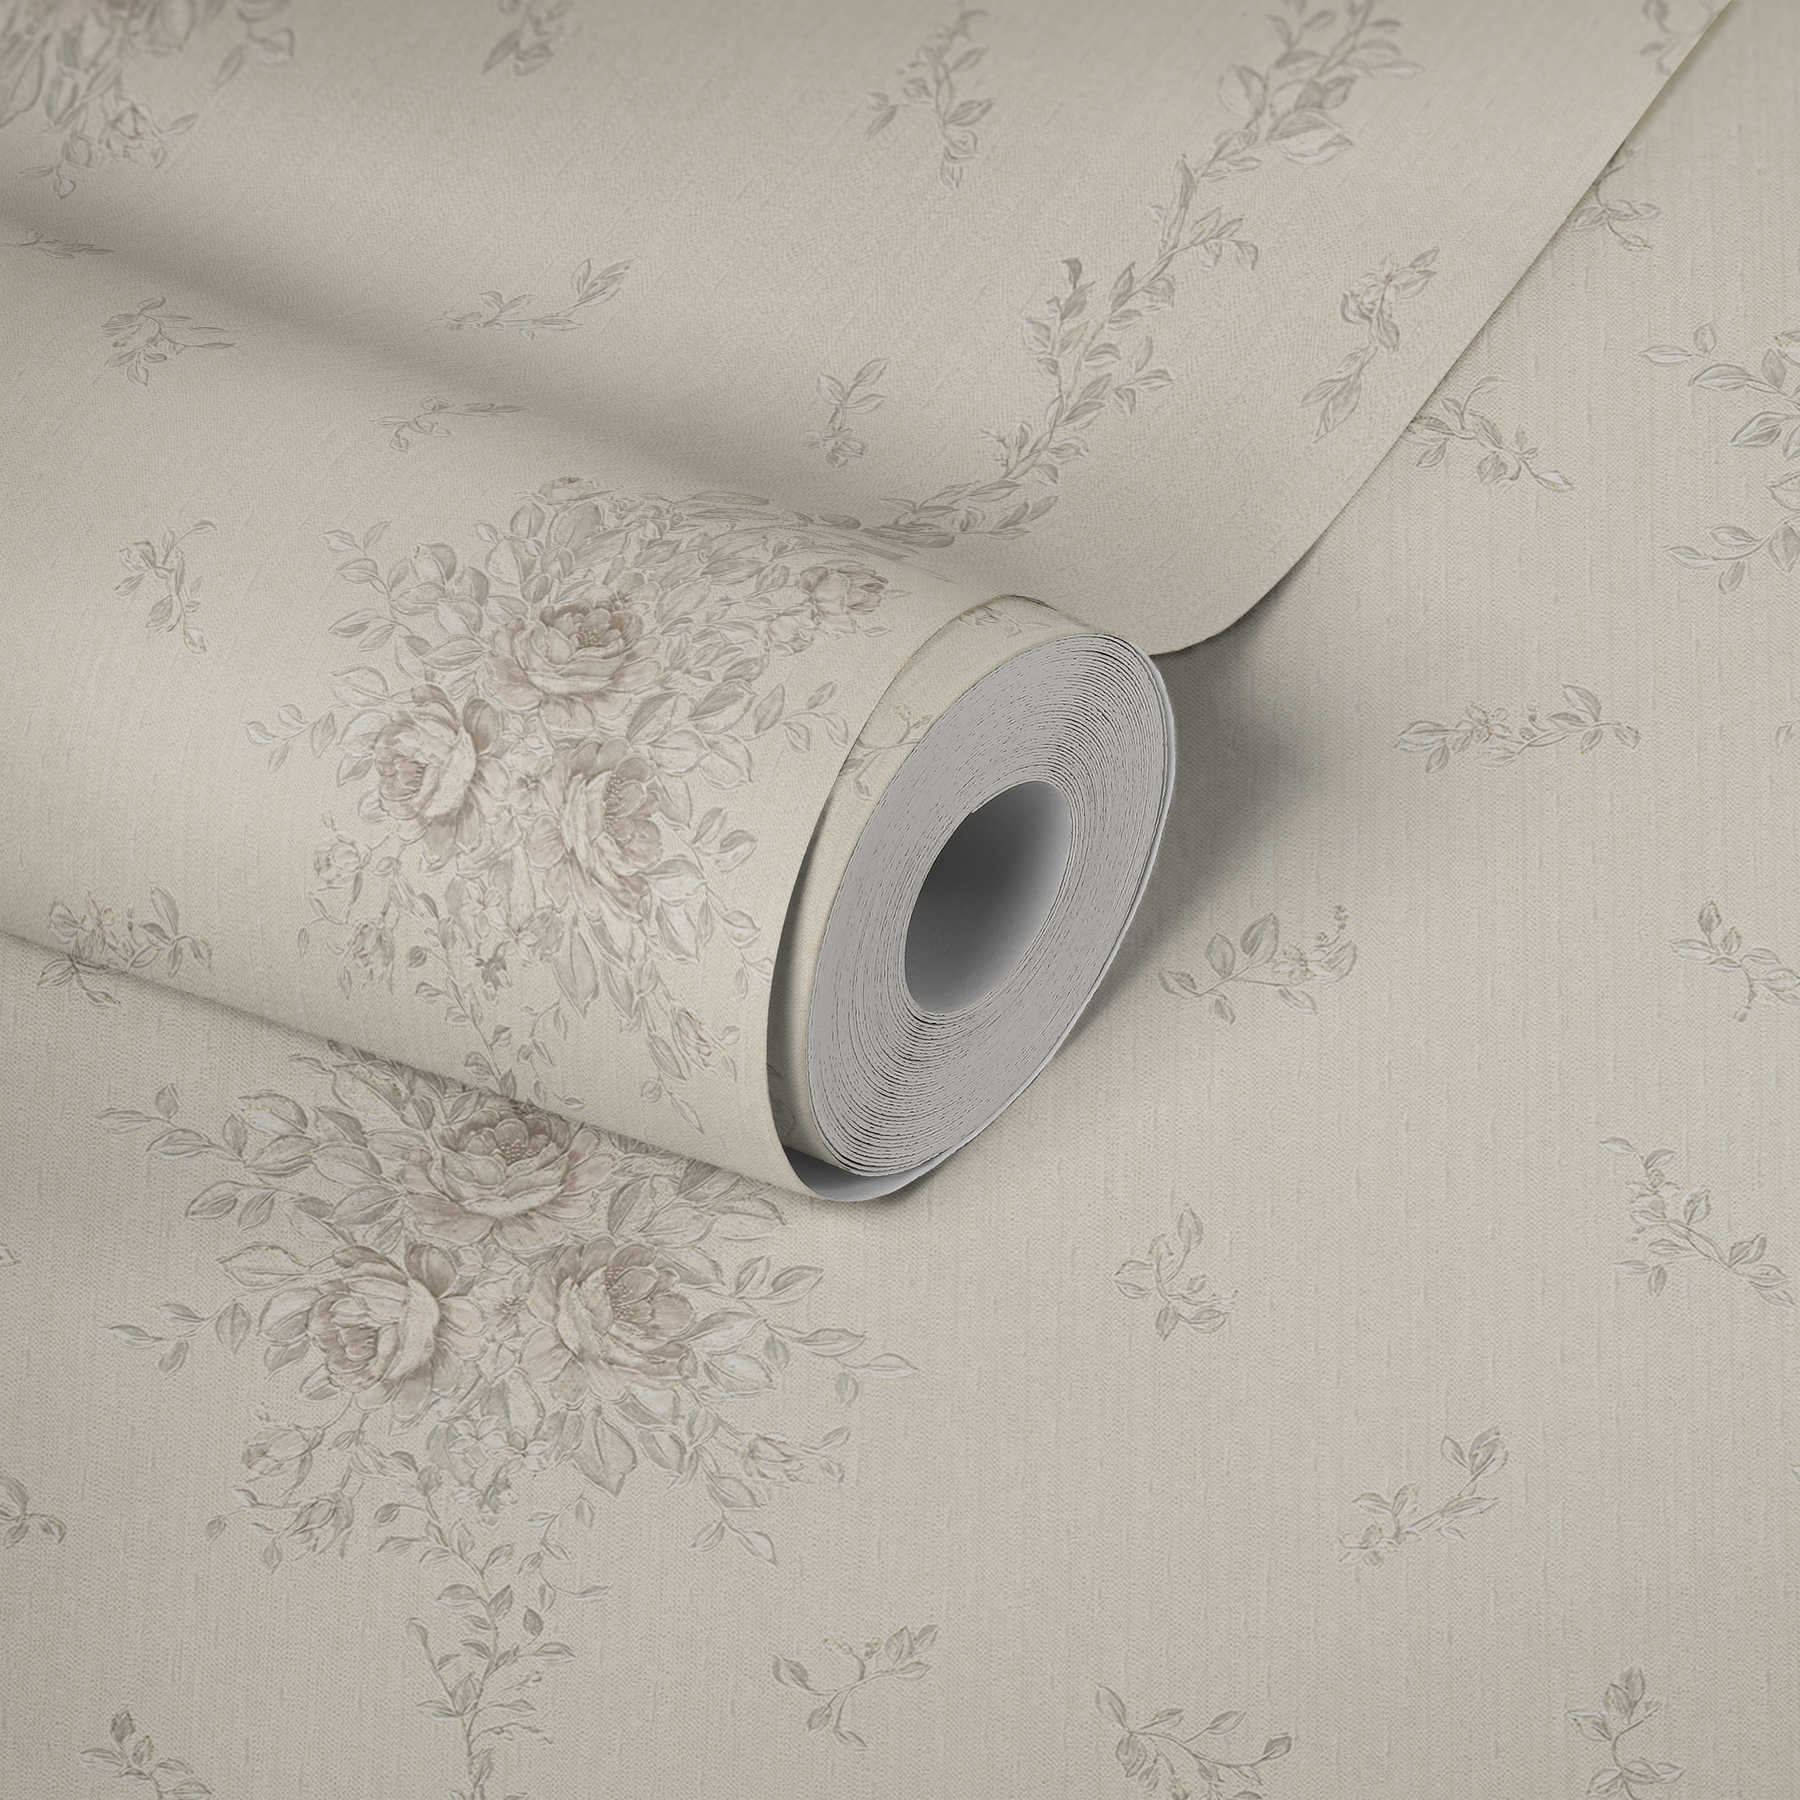             Roses wallpaper with flowers & stripes effect - grey, metallic
        